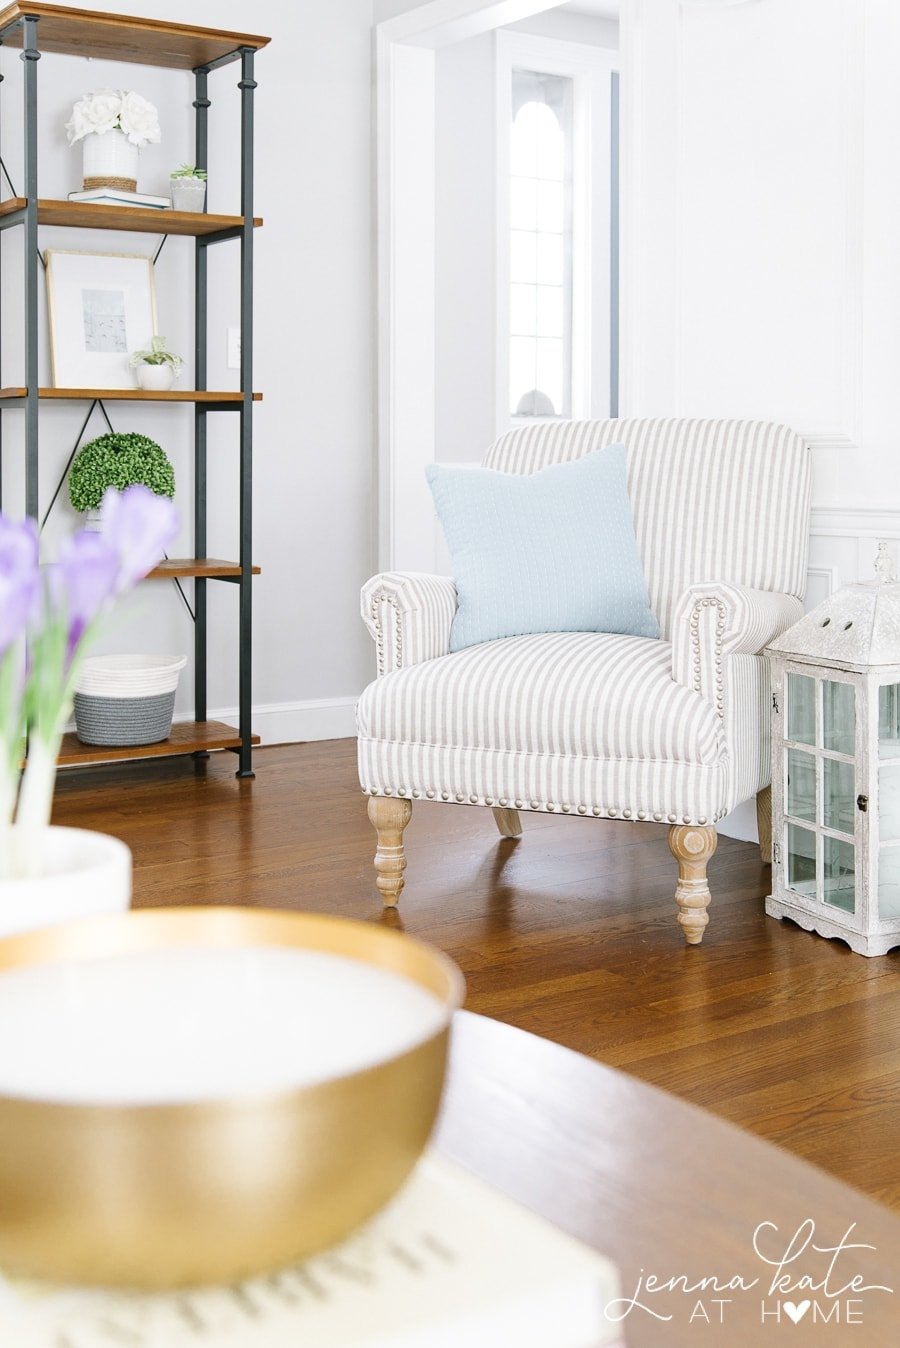 Striped chair with light blue pillow in a light and airy living room for the spring